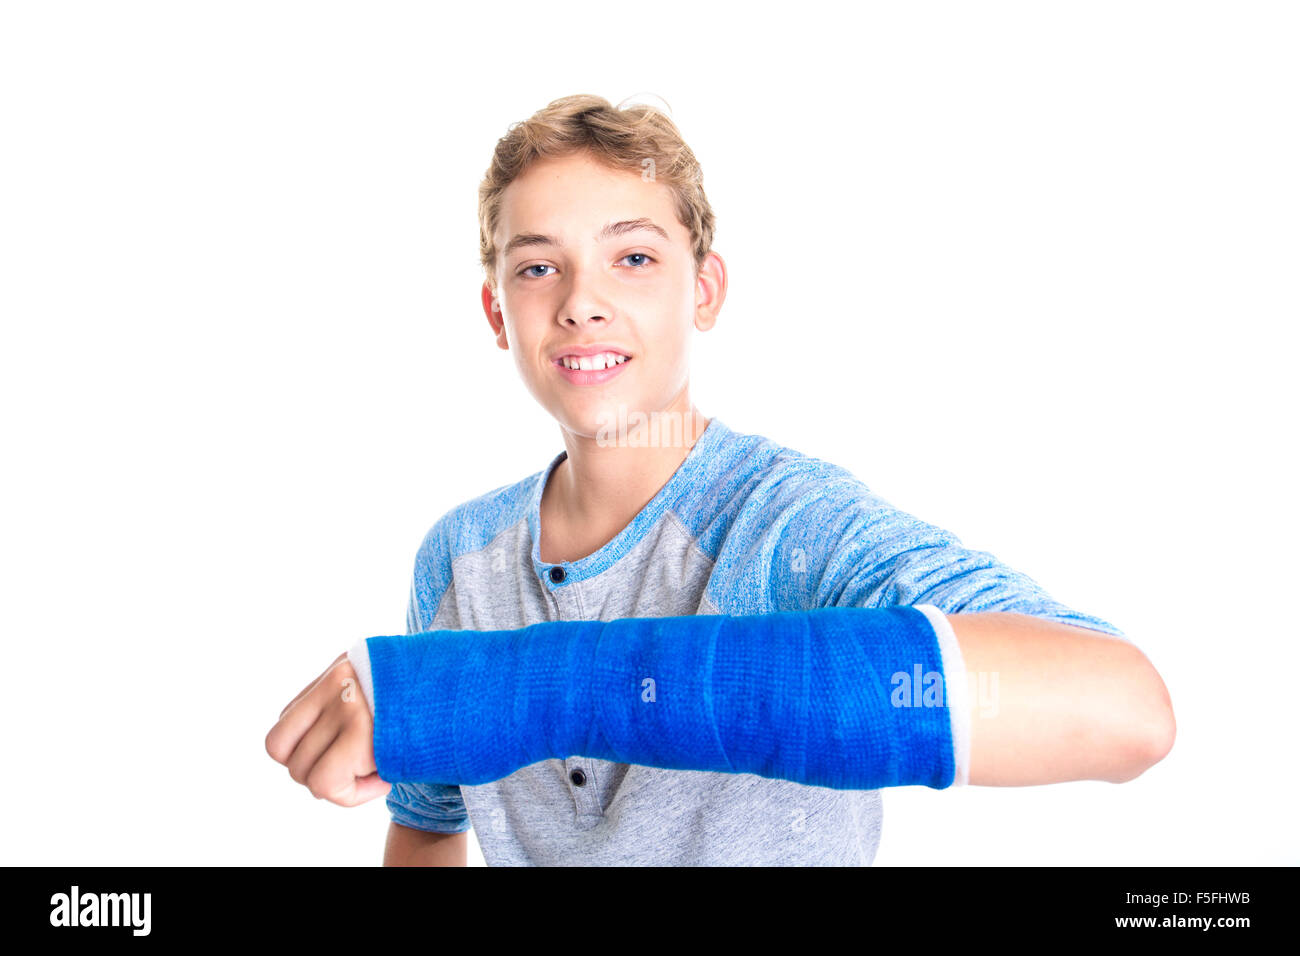 Blue cast on hand and arm isolated on white background Stock Photo